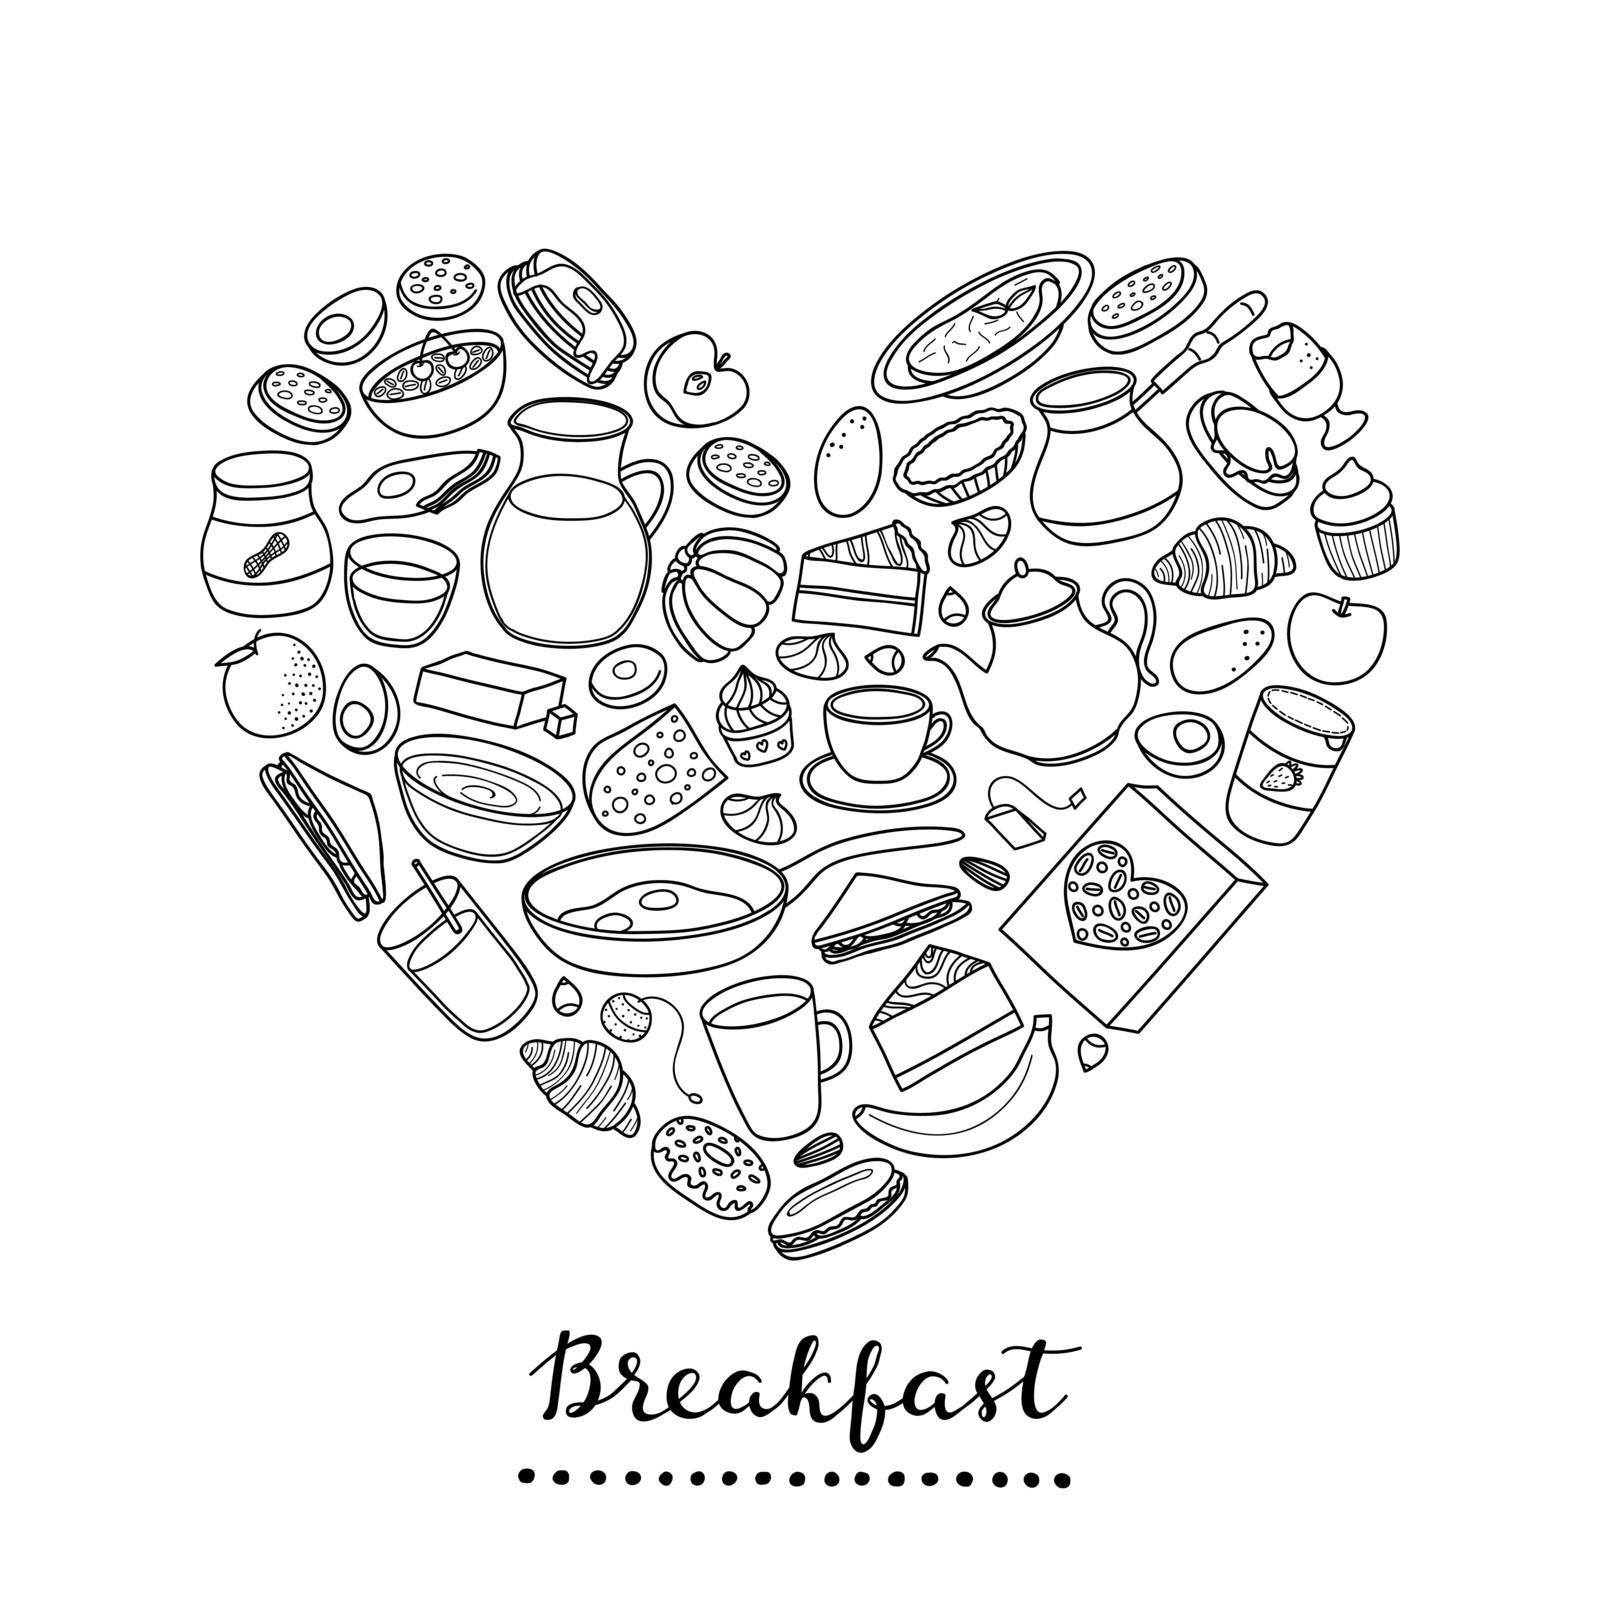 Hand drawn outline buffet style breakfast dishes including eggs, pancakes, beverages, fruits, sandwiches, cereals and yogurt composed in heart shape.